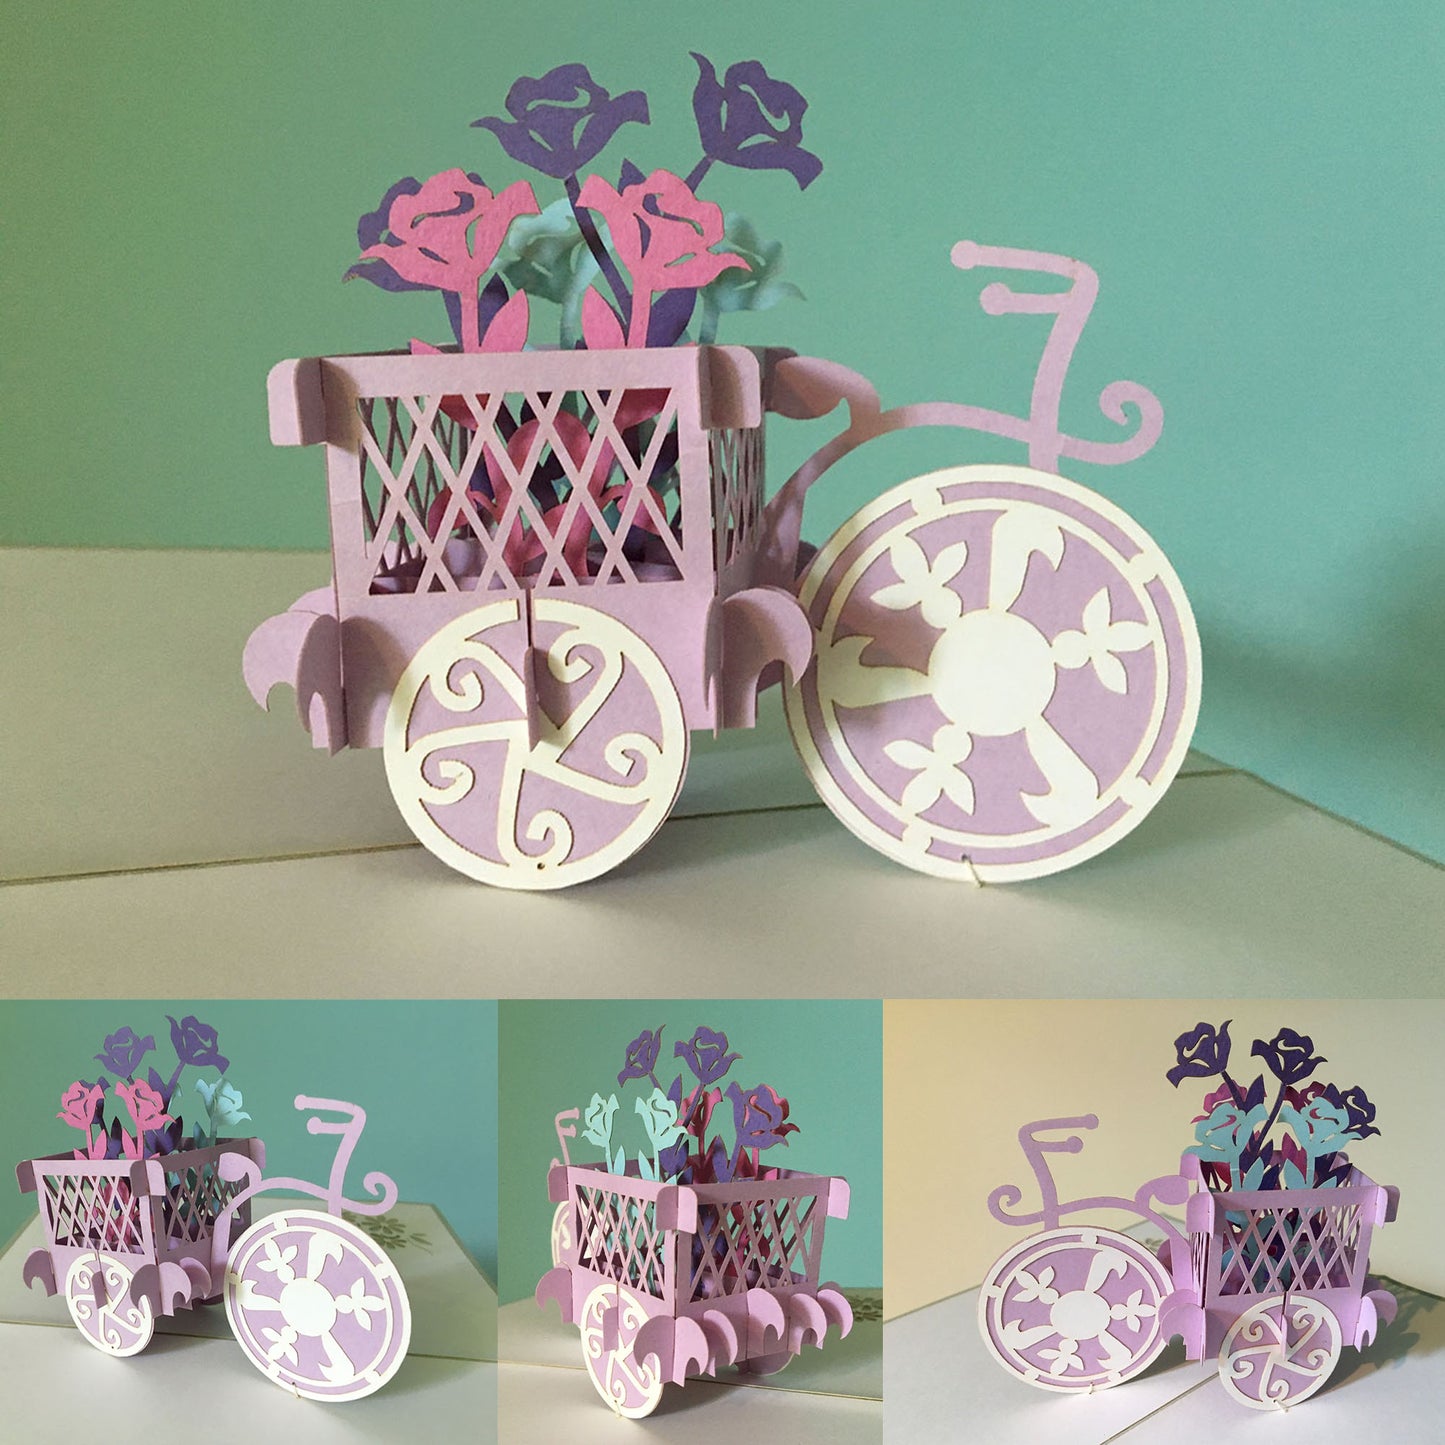 (2 Cards Pack) 3D Pop Up Flower Greeting Card 5x7 Inch 12.7 cm - Bicycle Flower Hummingbird